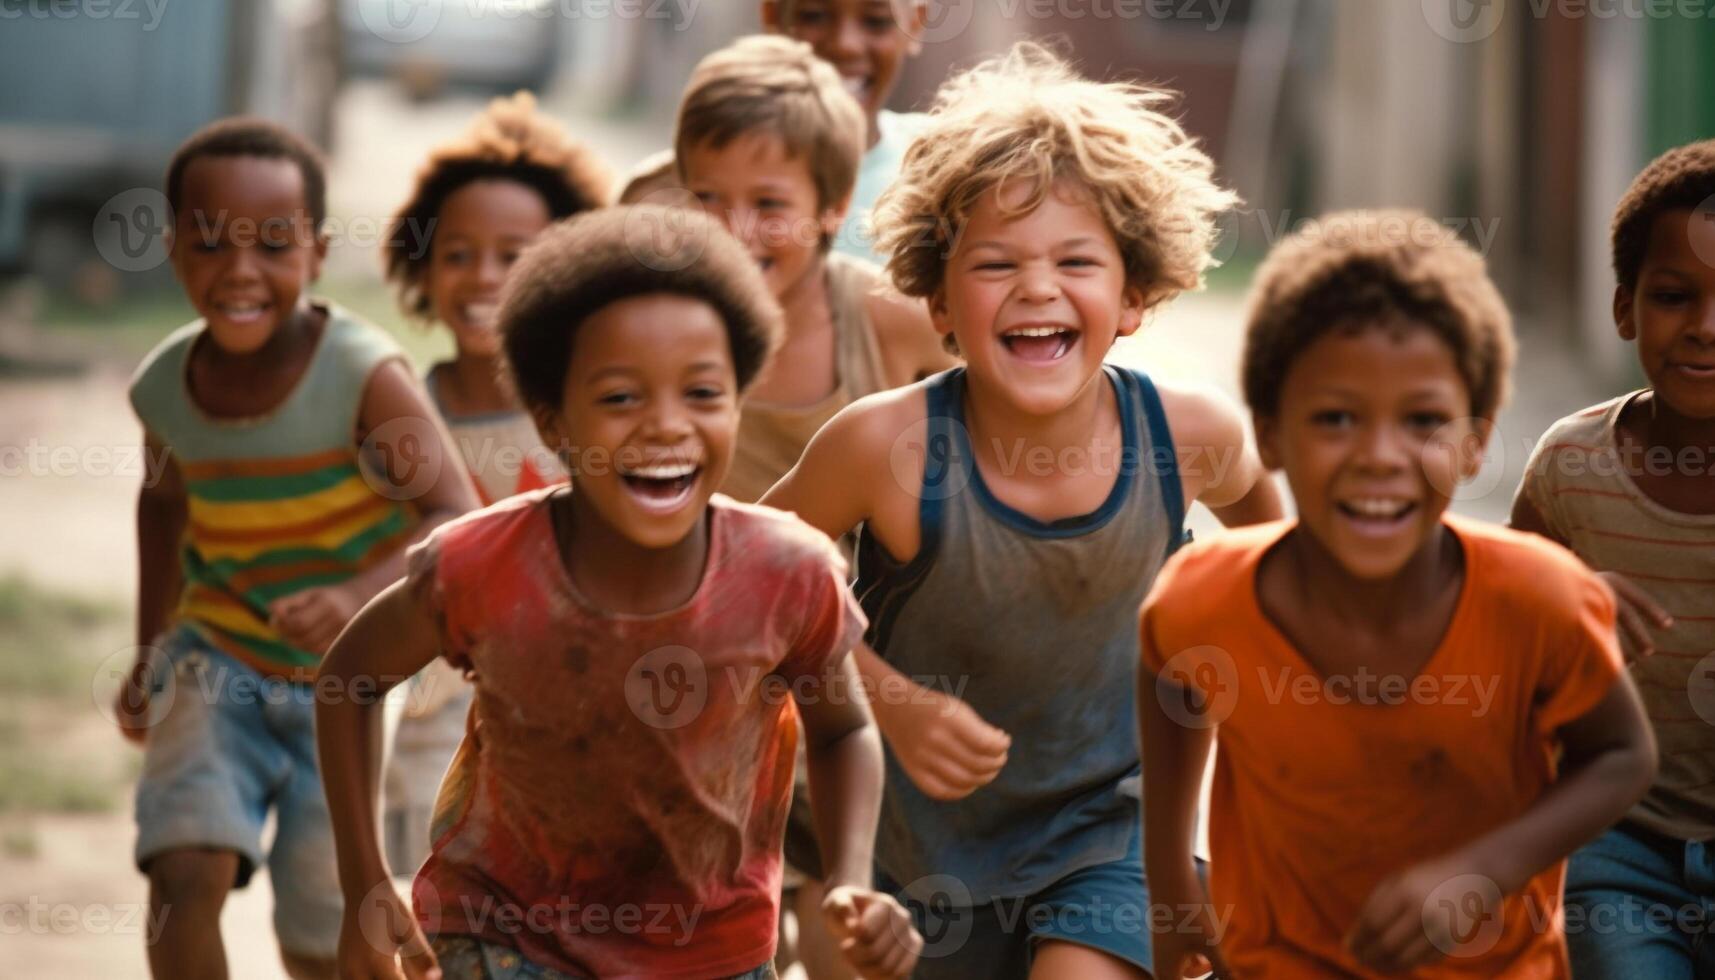 Group of smiling children enjoying carefree summer fun outdoors generated by AI photo